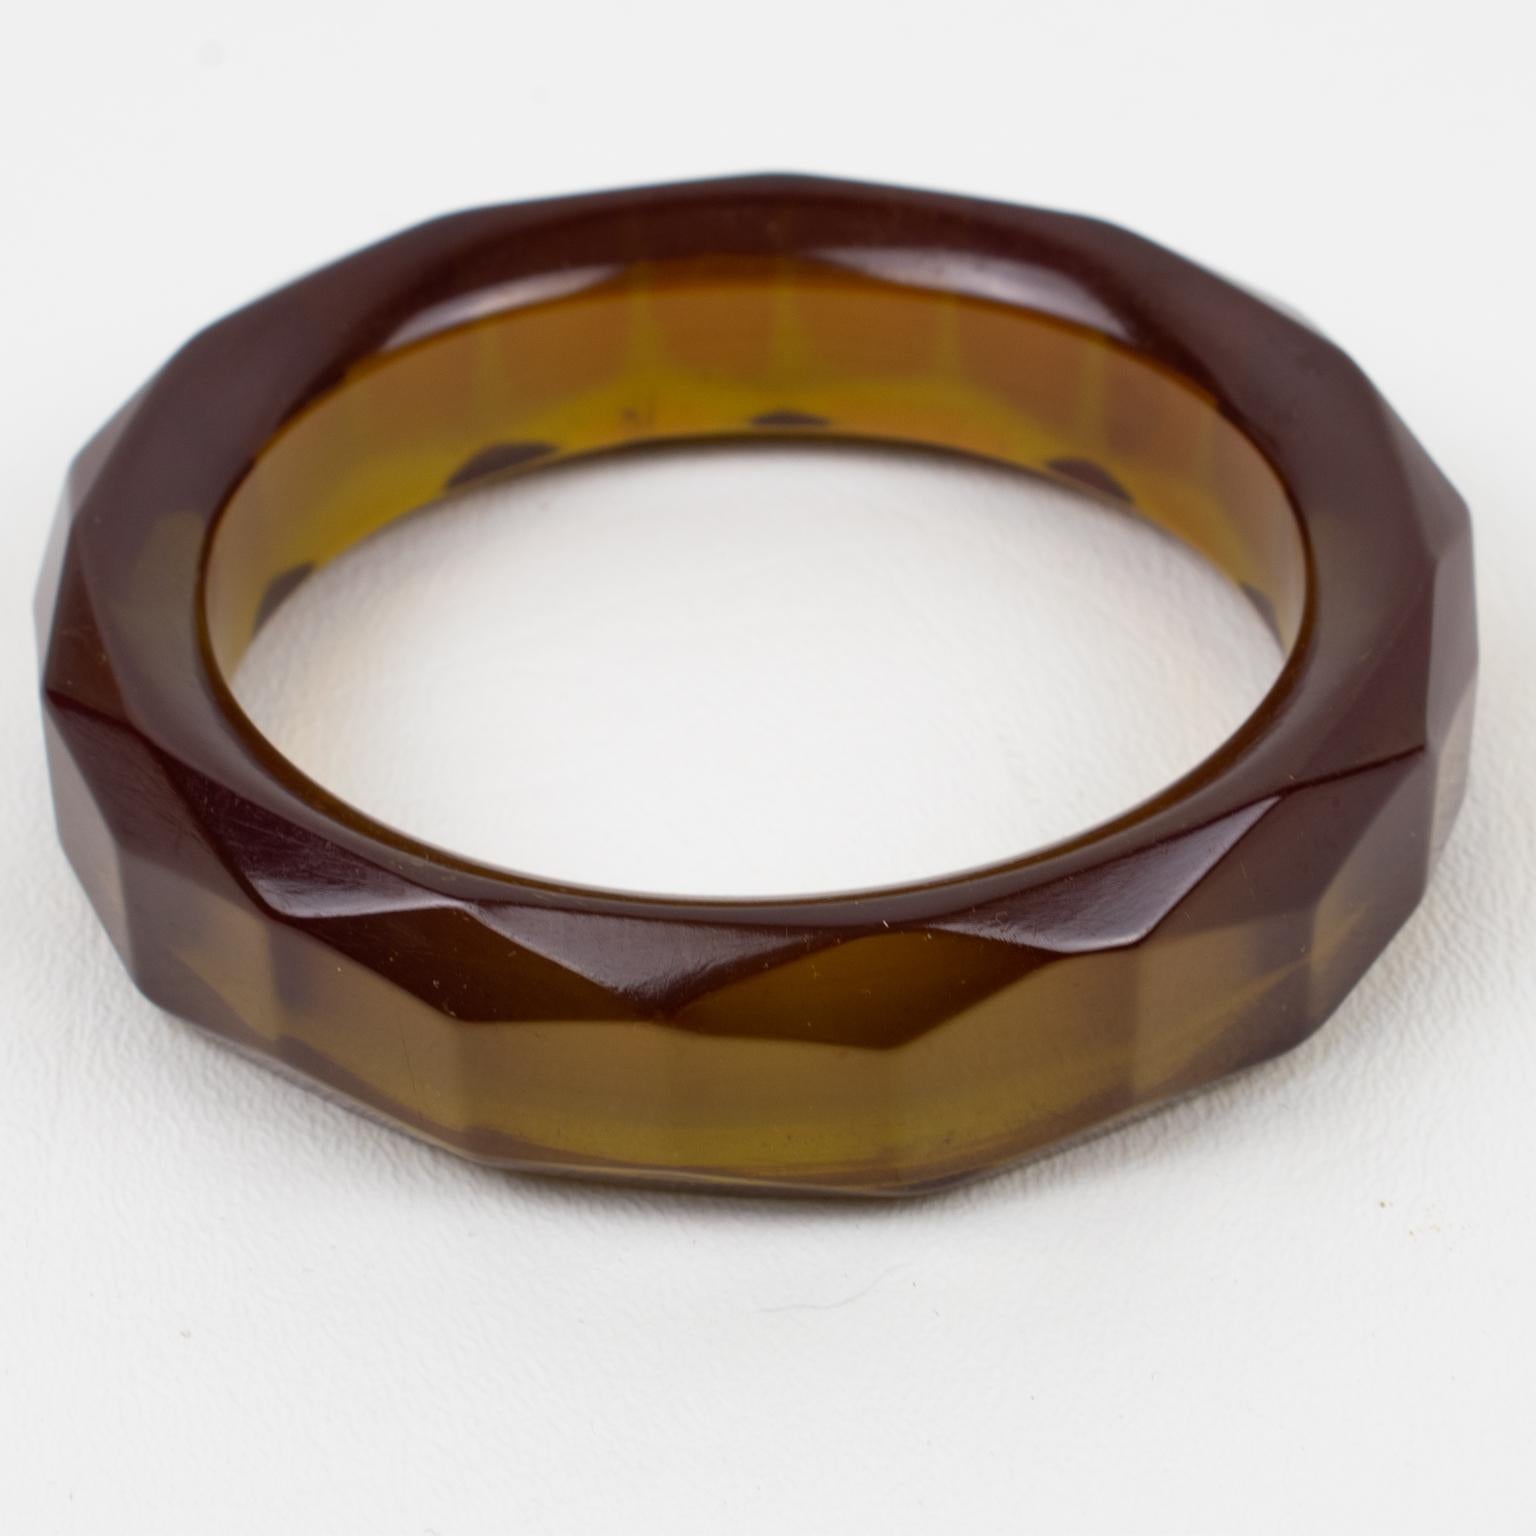 Stunning transparent olive oil Bakelite bracelet bangle. Chunky sliced shape with deeply faceted and carved design all around. Intense olive oil tone, all transparent green color with red-purple overtone on edges. This Prystal quality piece has all